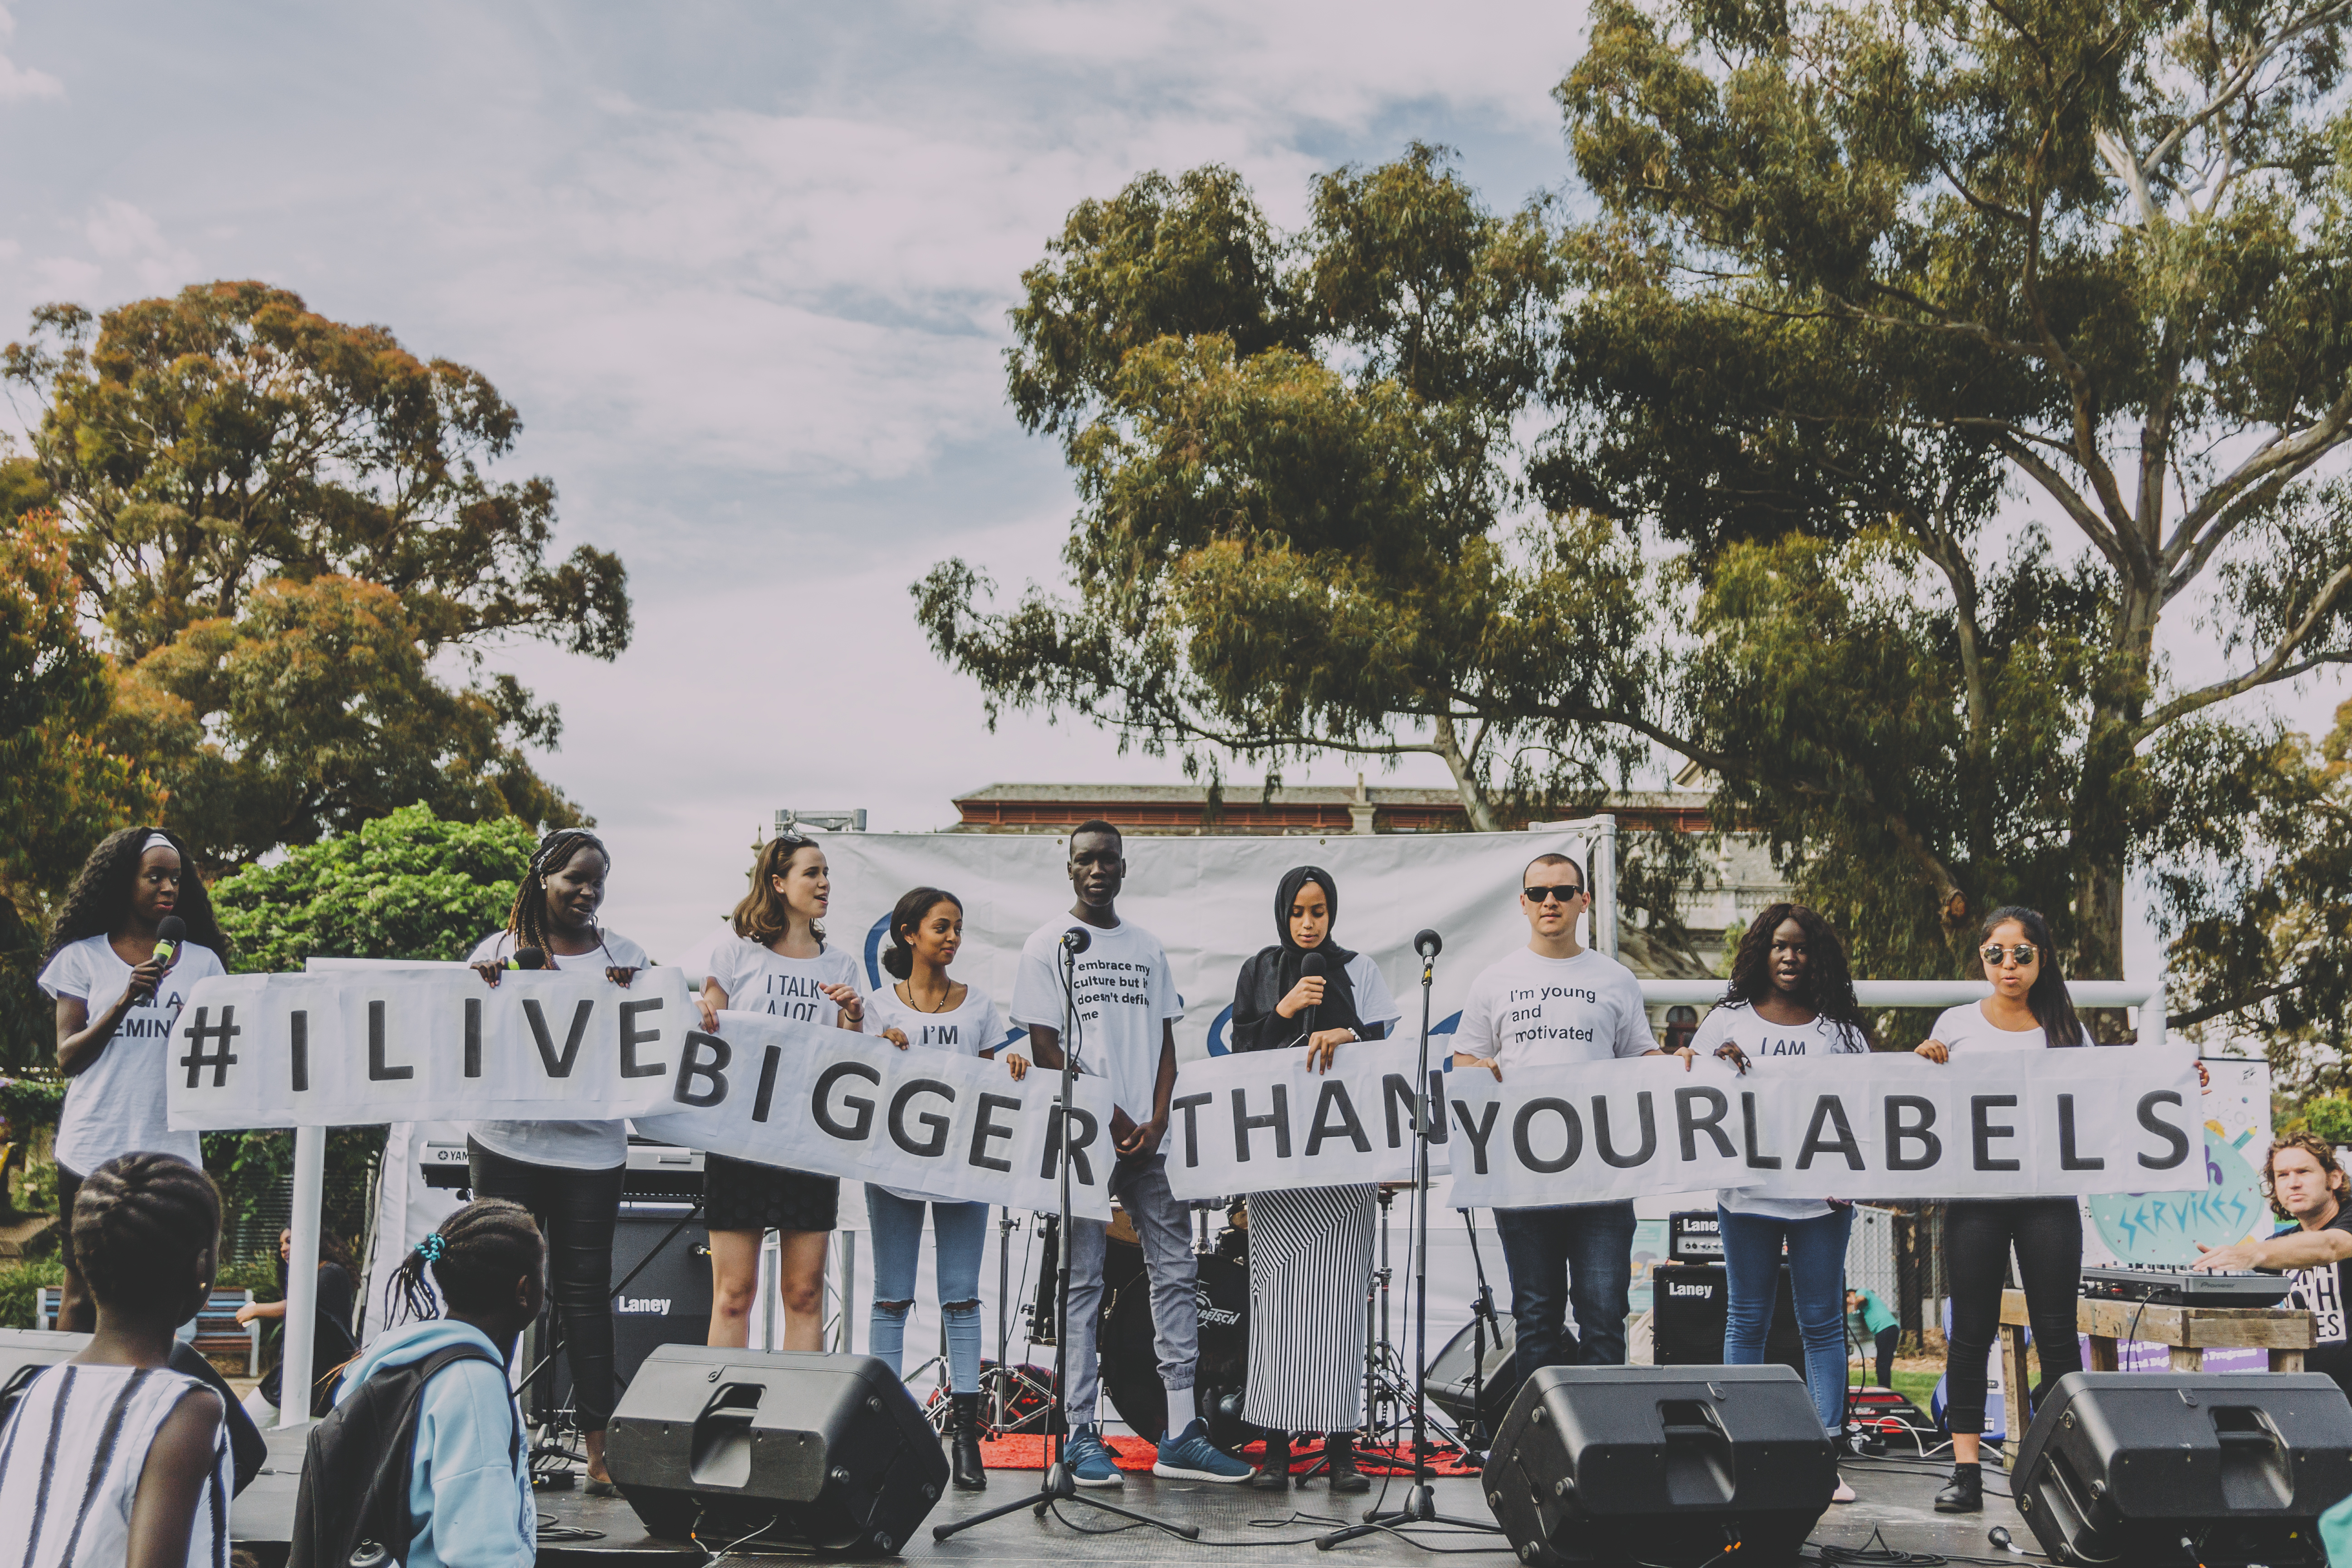 A group of young people on an outdoor stage holding signs that read I live bigger than your labels